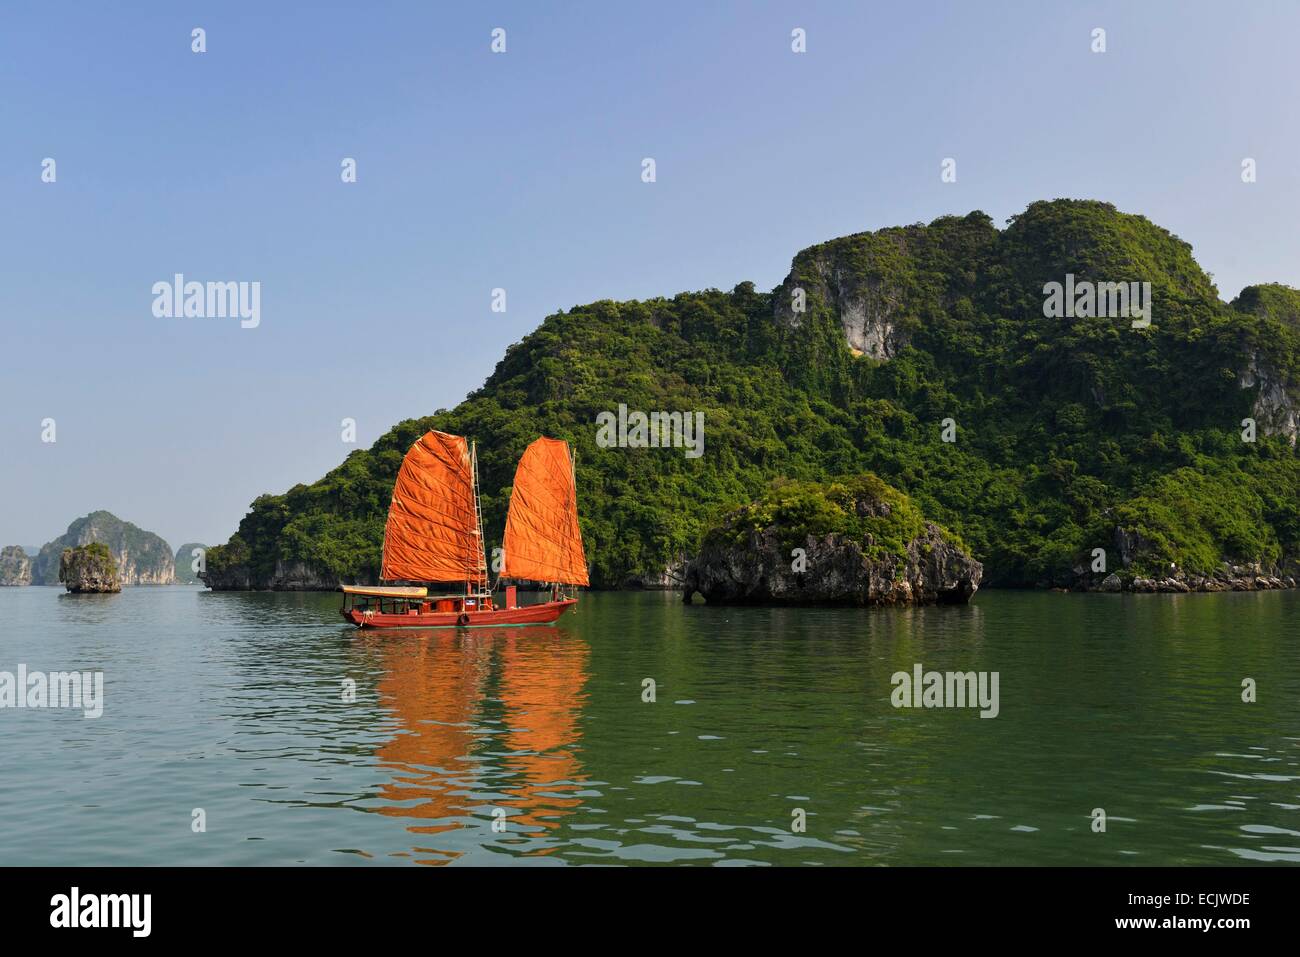 Vietnam, Quang Ninh province, Ha Long bay, listed as World Heritage by UNESCO, junk boat in the bay Stock Photo